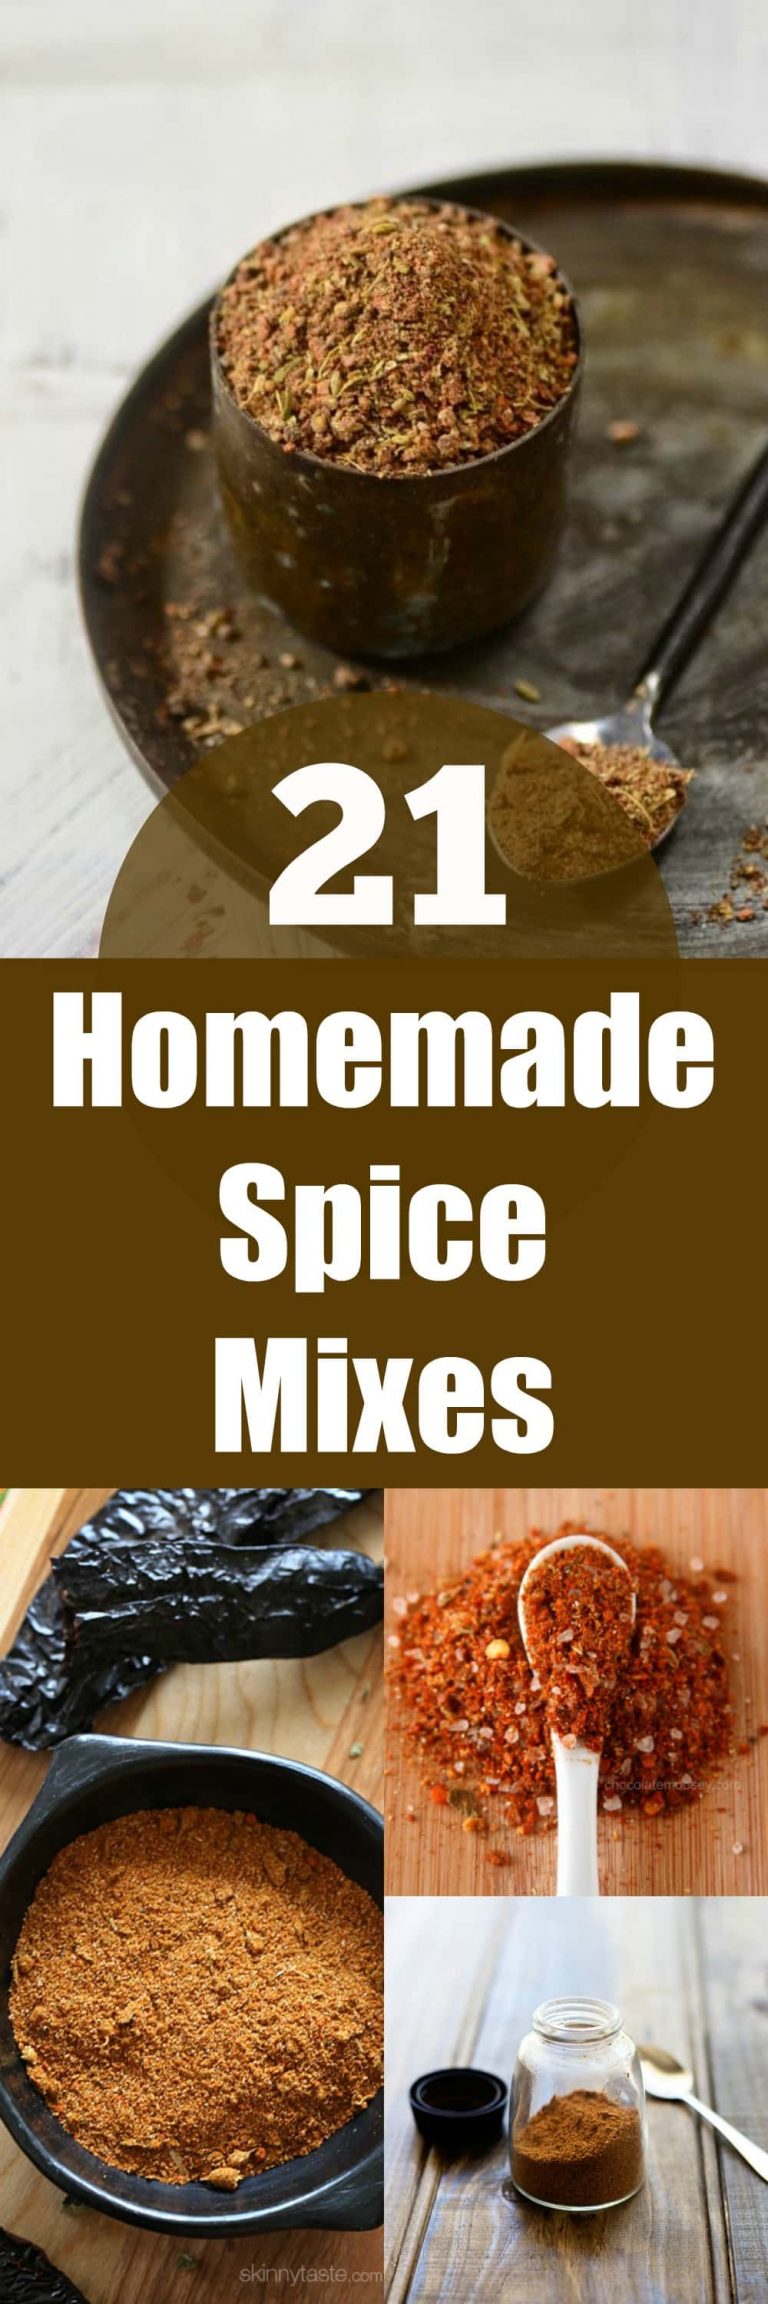 21 Homemade Spice Mixes The Perfect Diy T 